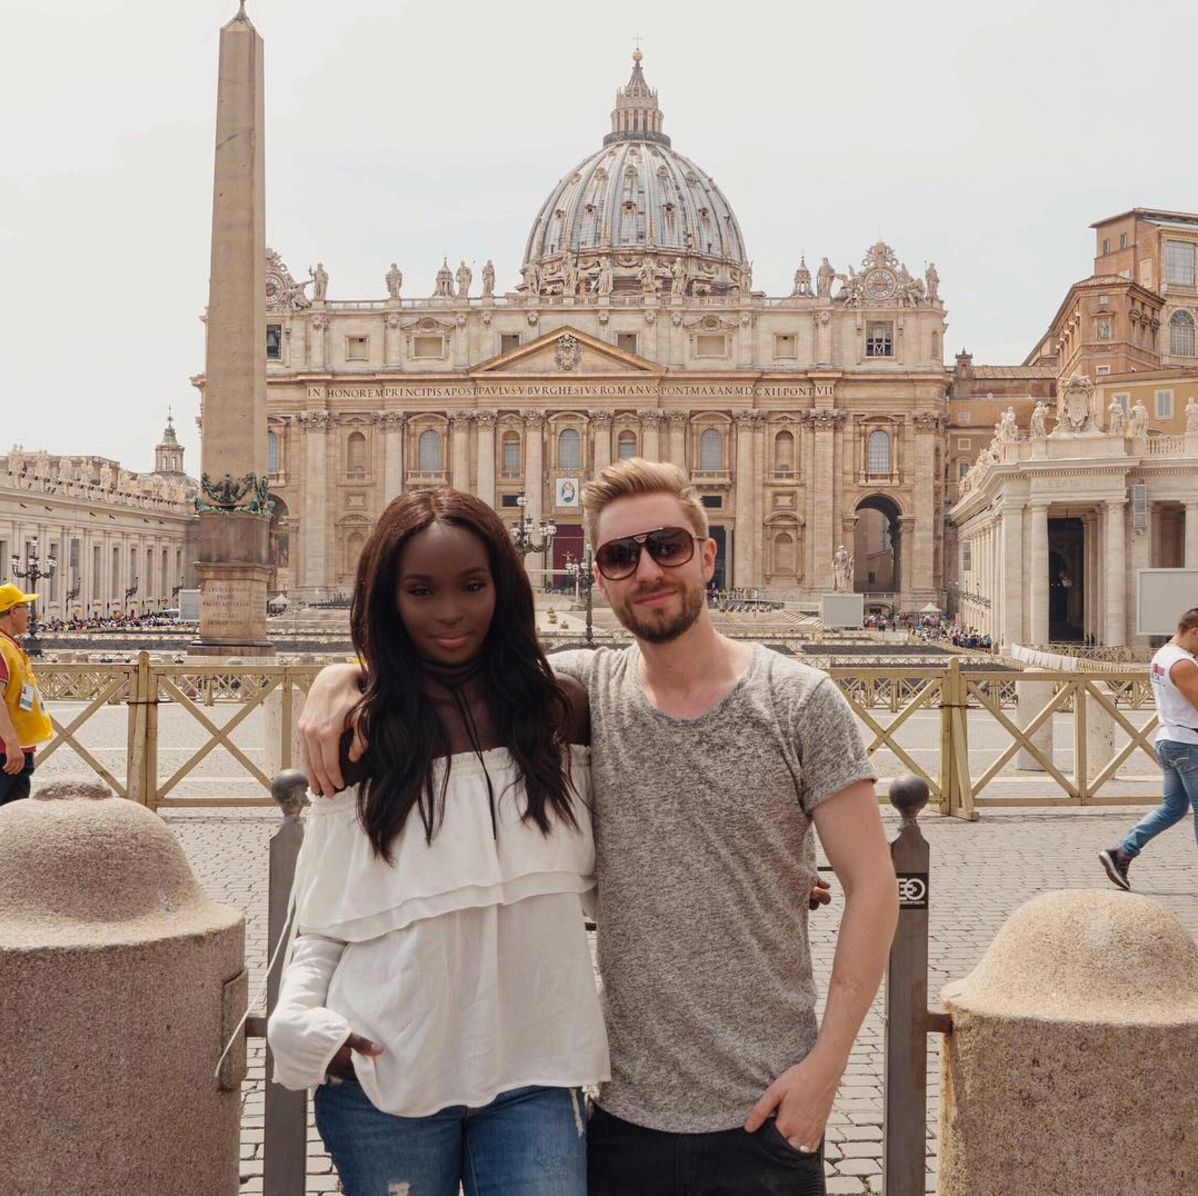 15 Adorable Instagram Couples Who Will Make You Fall In Love With Their Love
